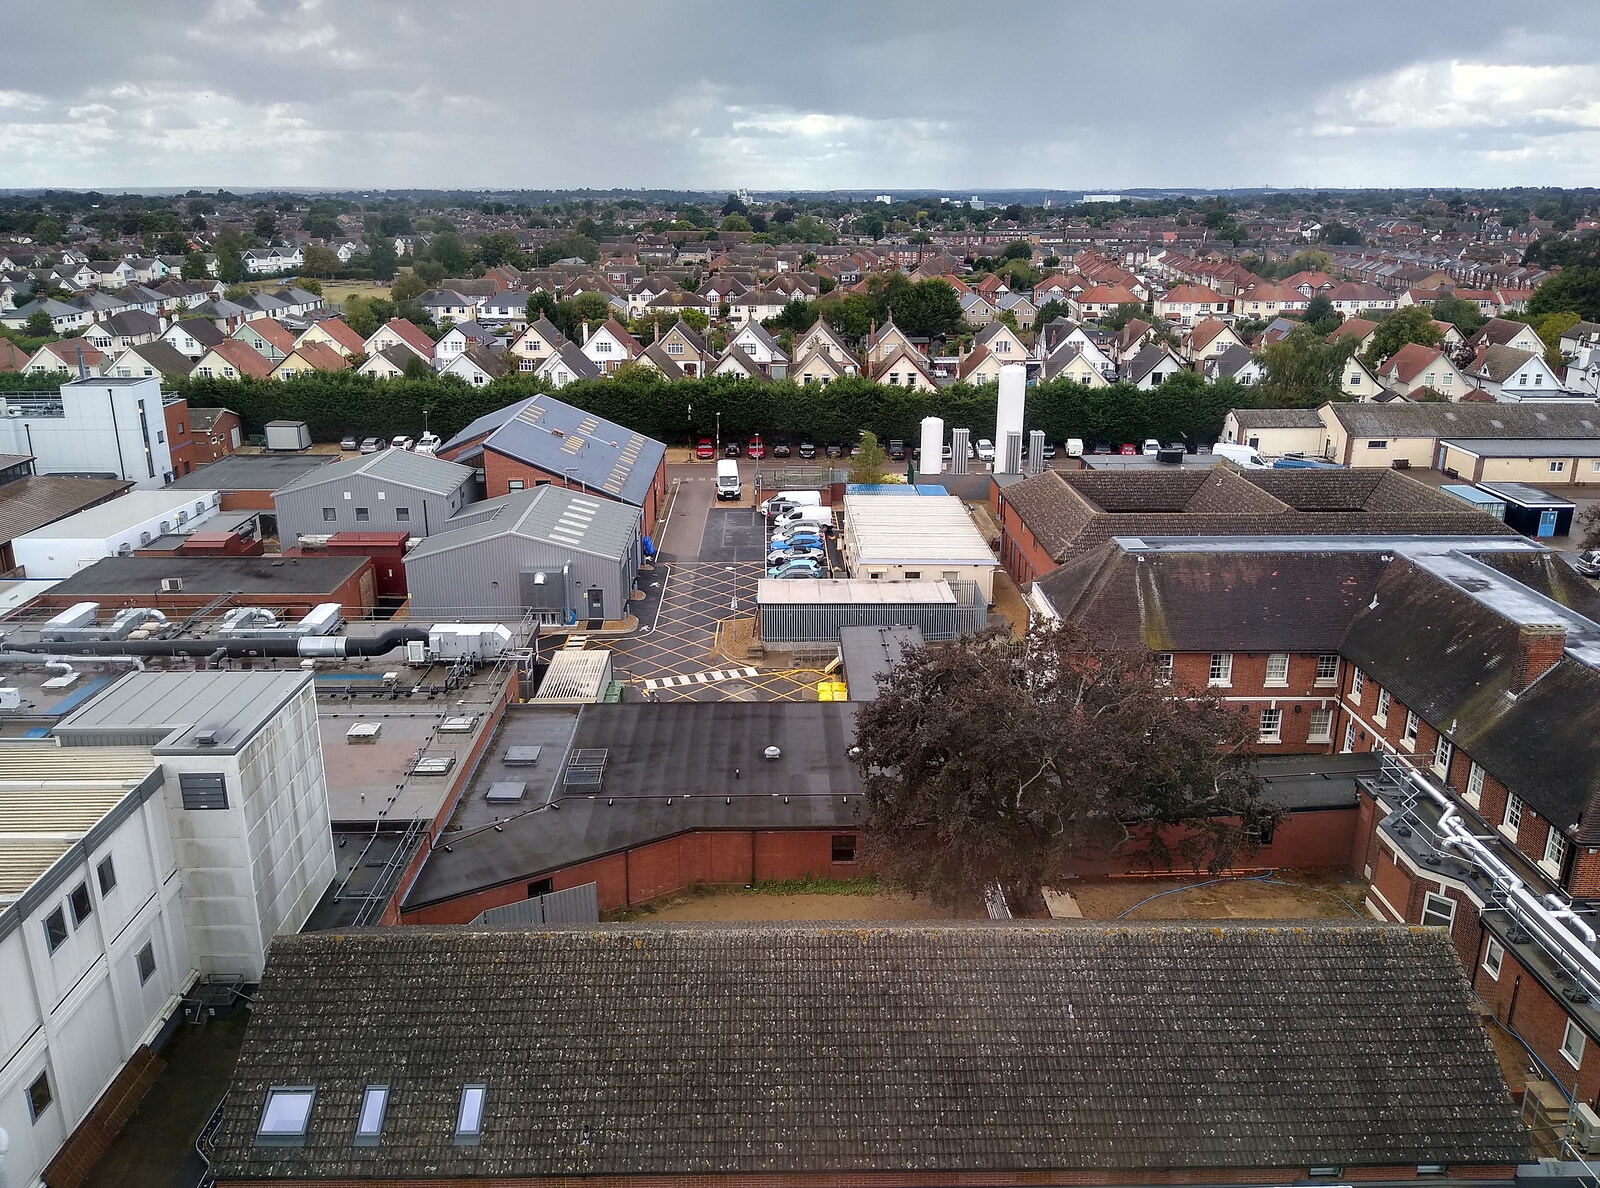 A Heritage Open Day, Eye, Suffolk - 18th September 2022: The view from Grandad's 7th-floor room